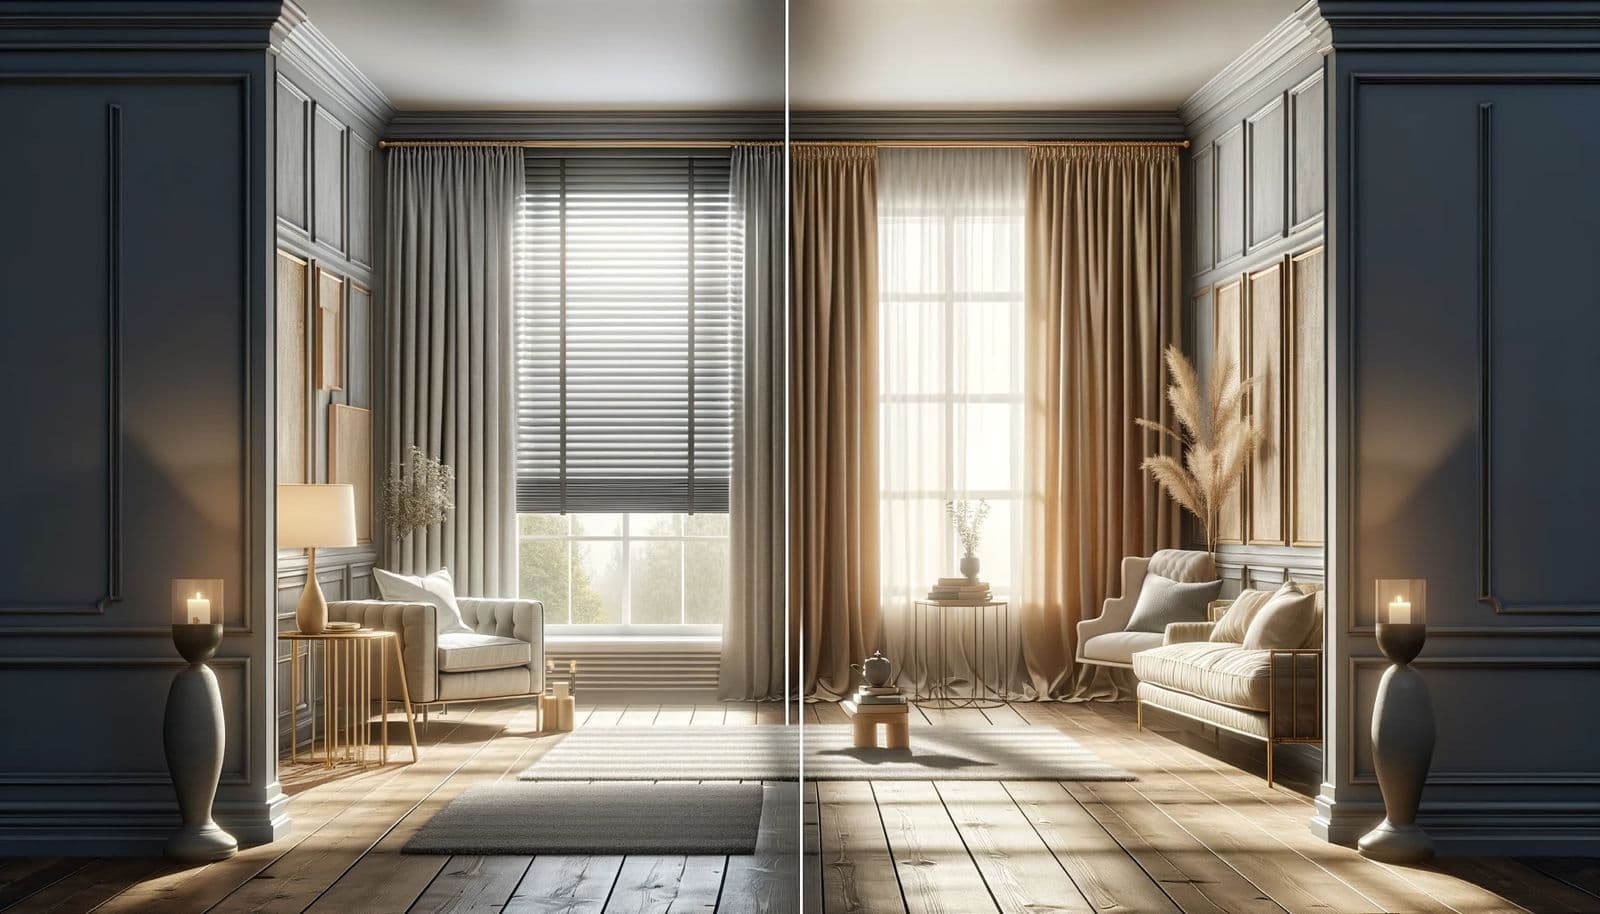 Curtains vs Blinds: Which Should You Choose?